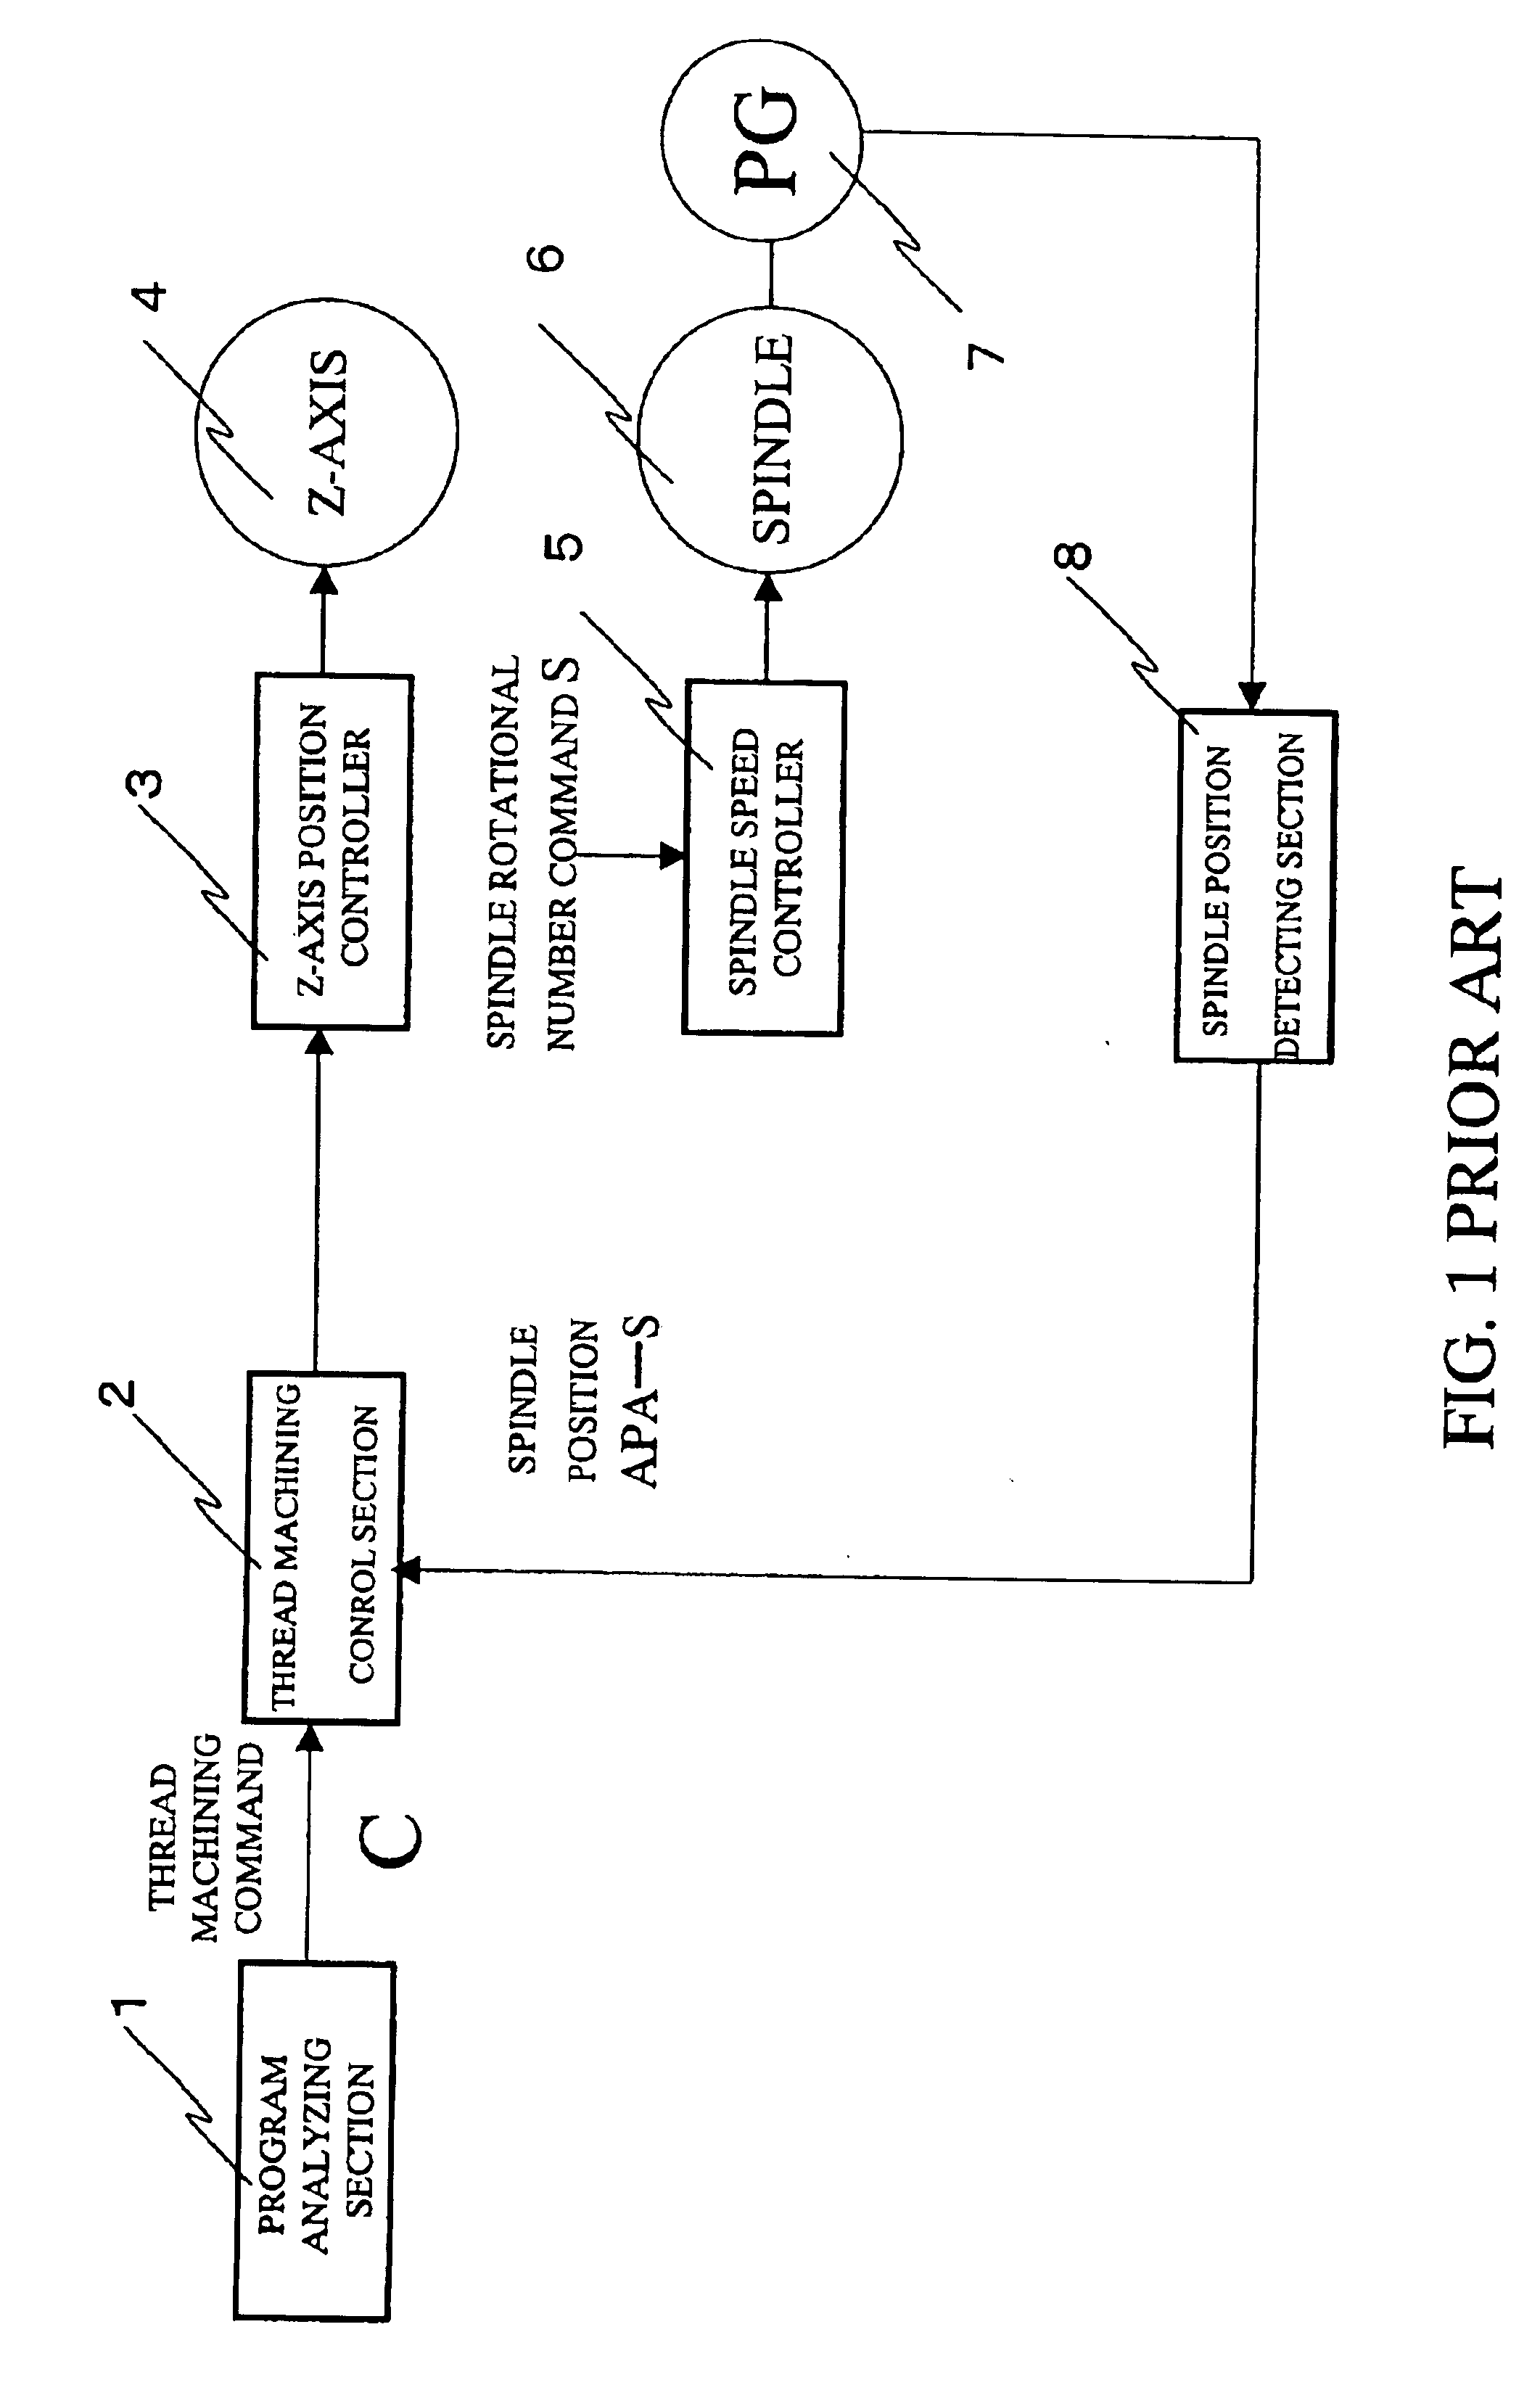 Thread machining control method and apparatus therefor